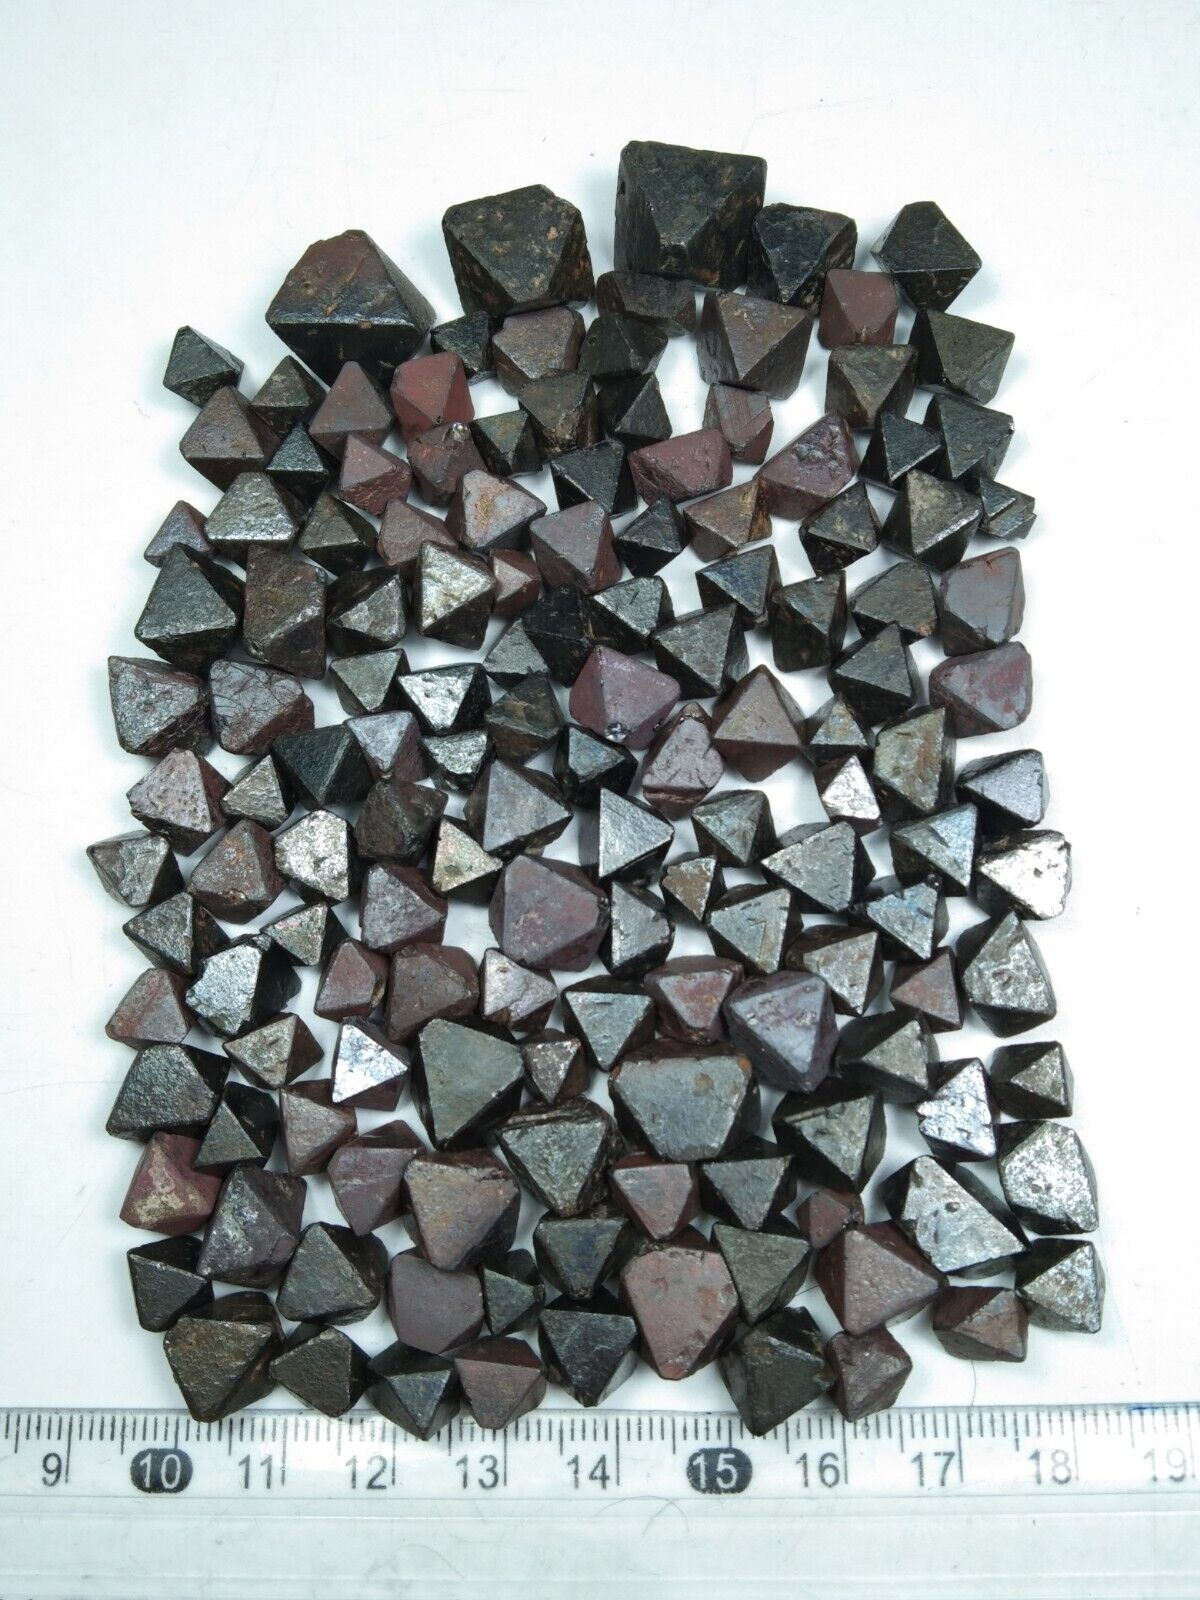 Octahedron magnetite crystals having nice termination (140 pieces lot)